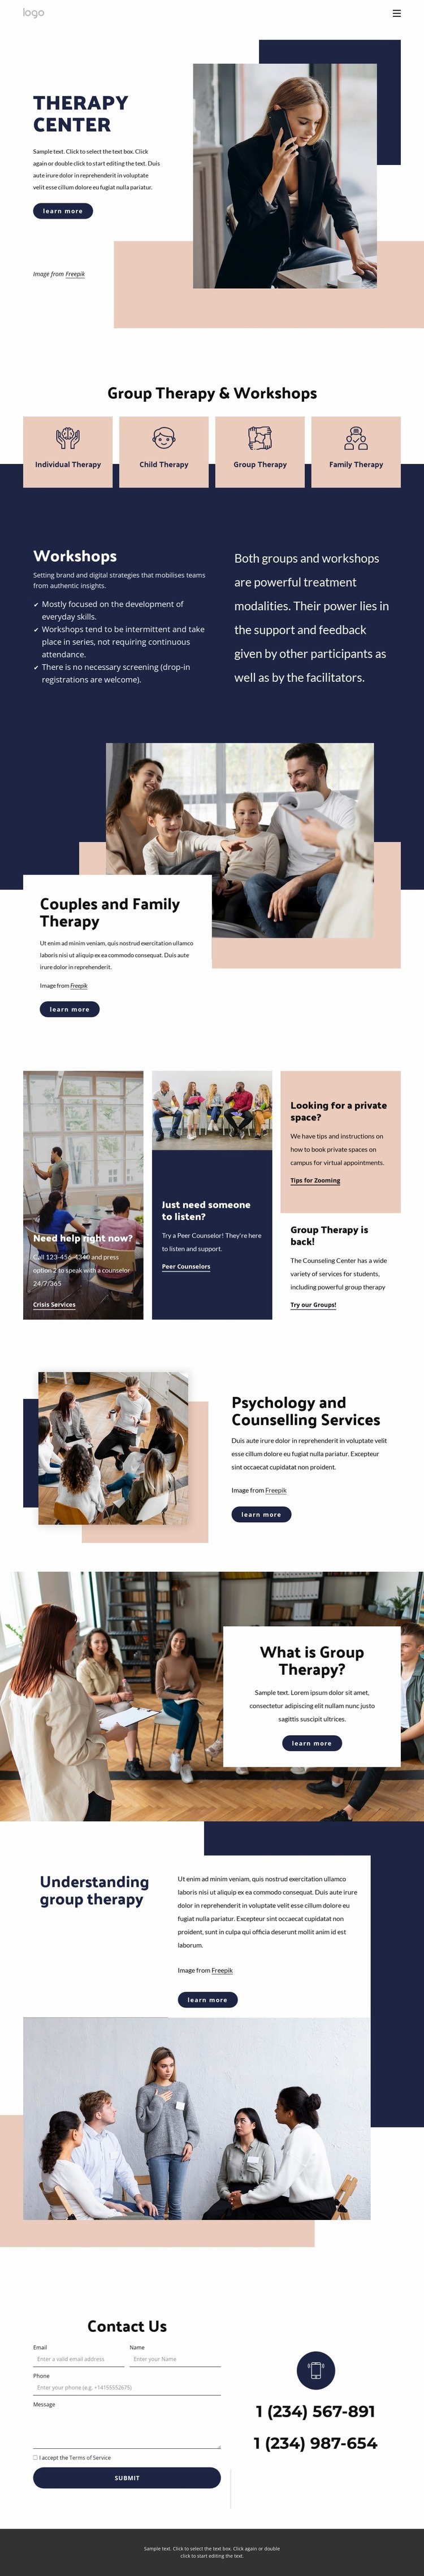 Therapy center Web Page Design